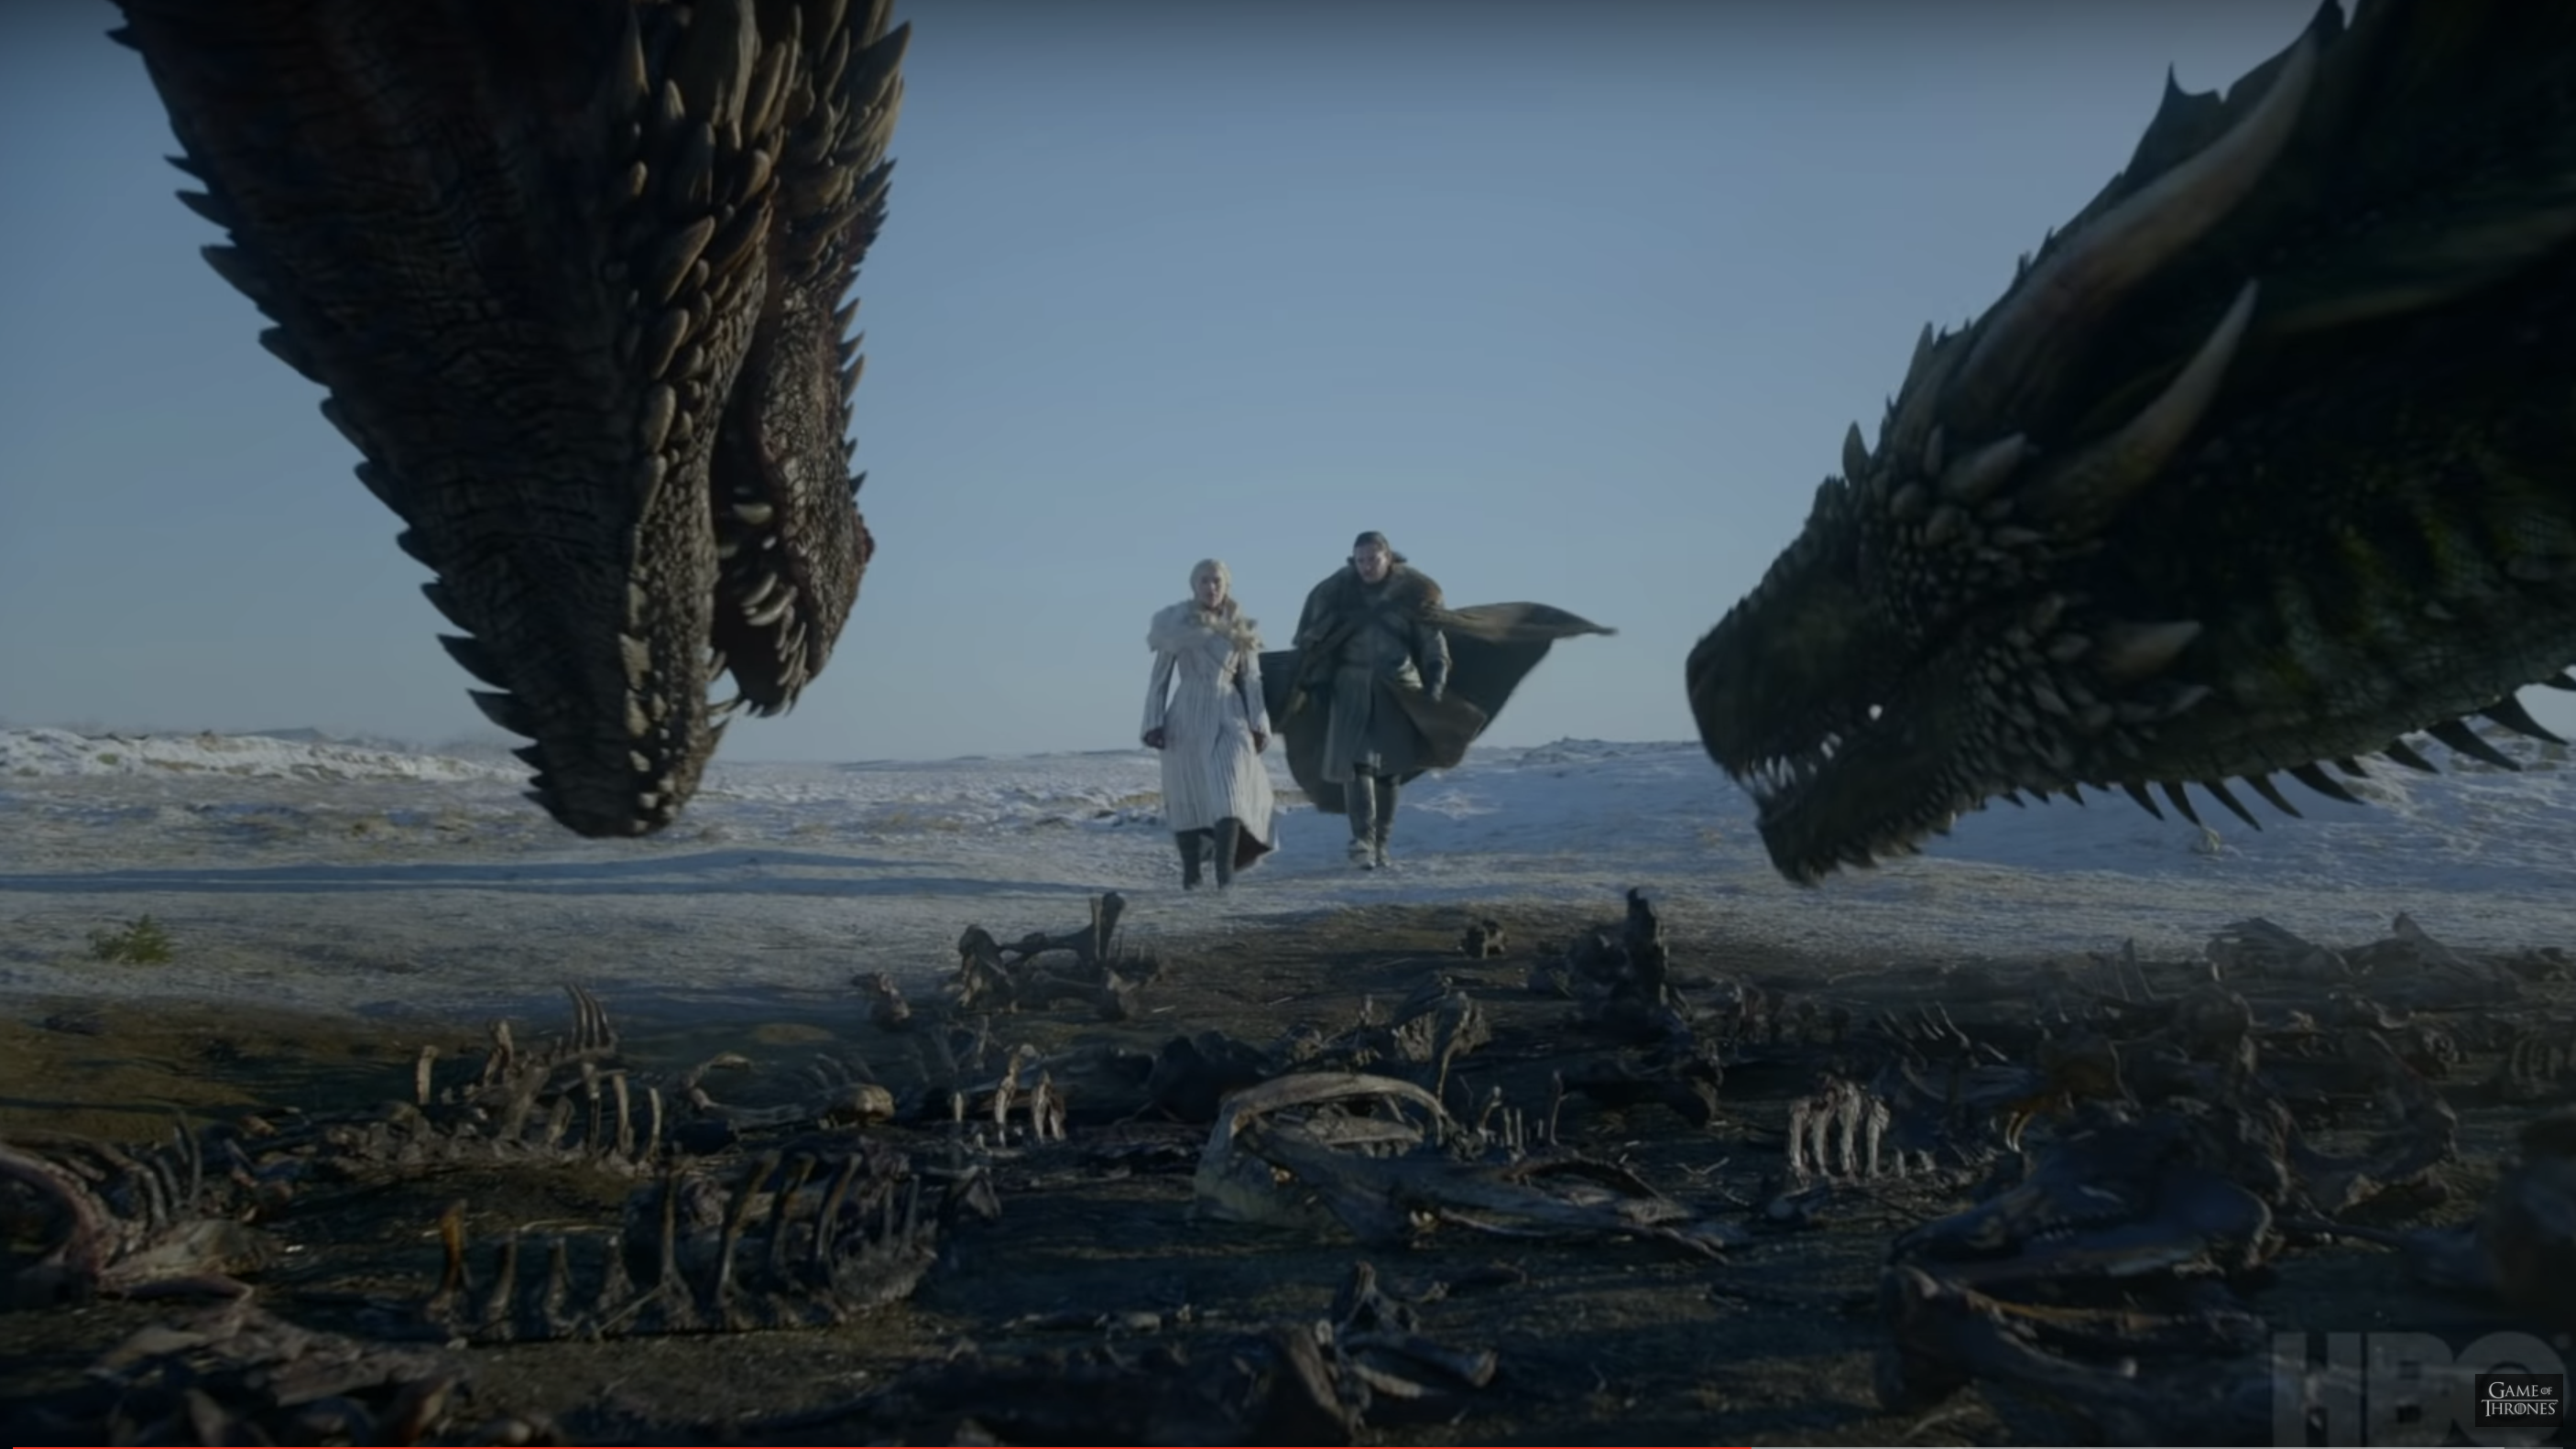 How to Watch Game of Thrones Season 8 Online - Stream GoT Live